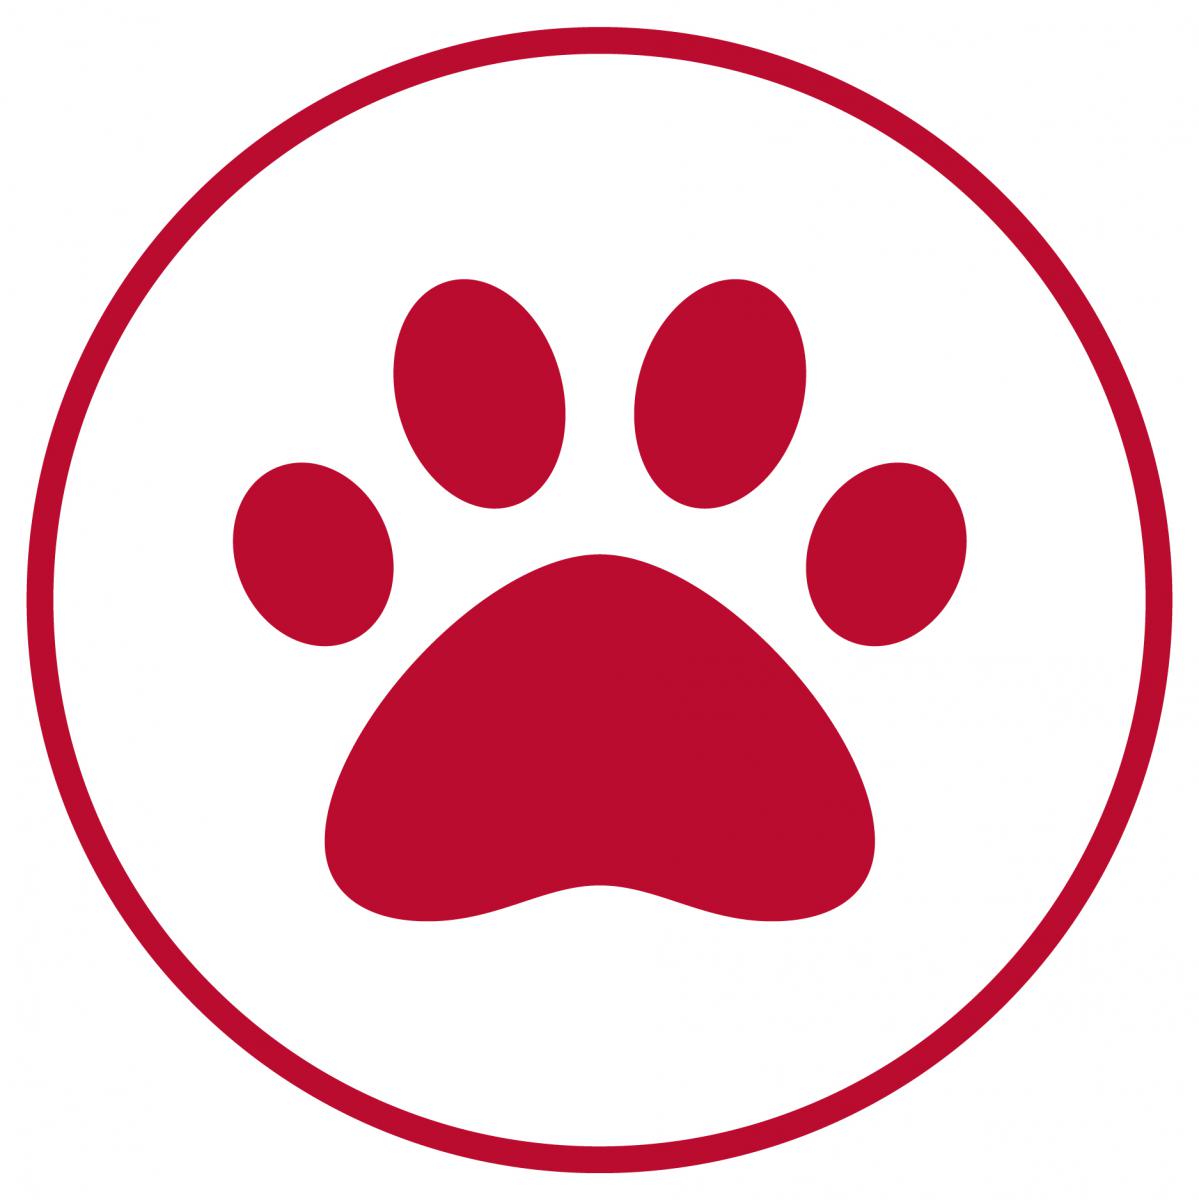 Red circle with a paw.